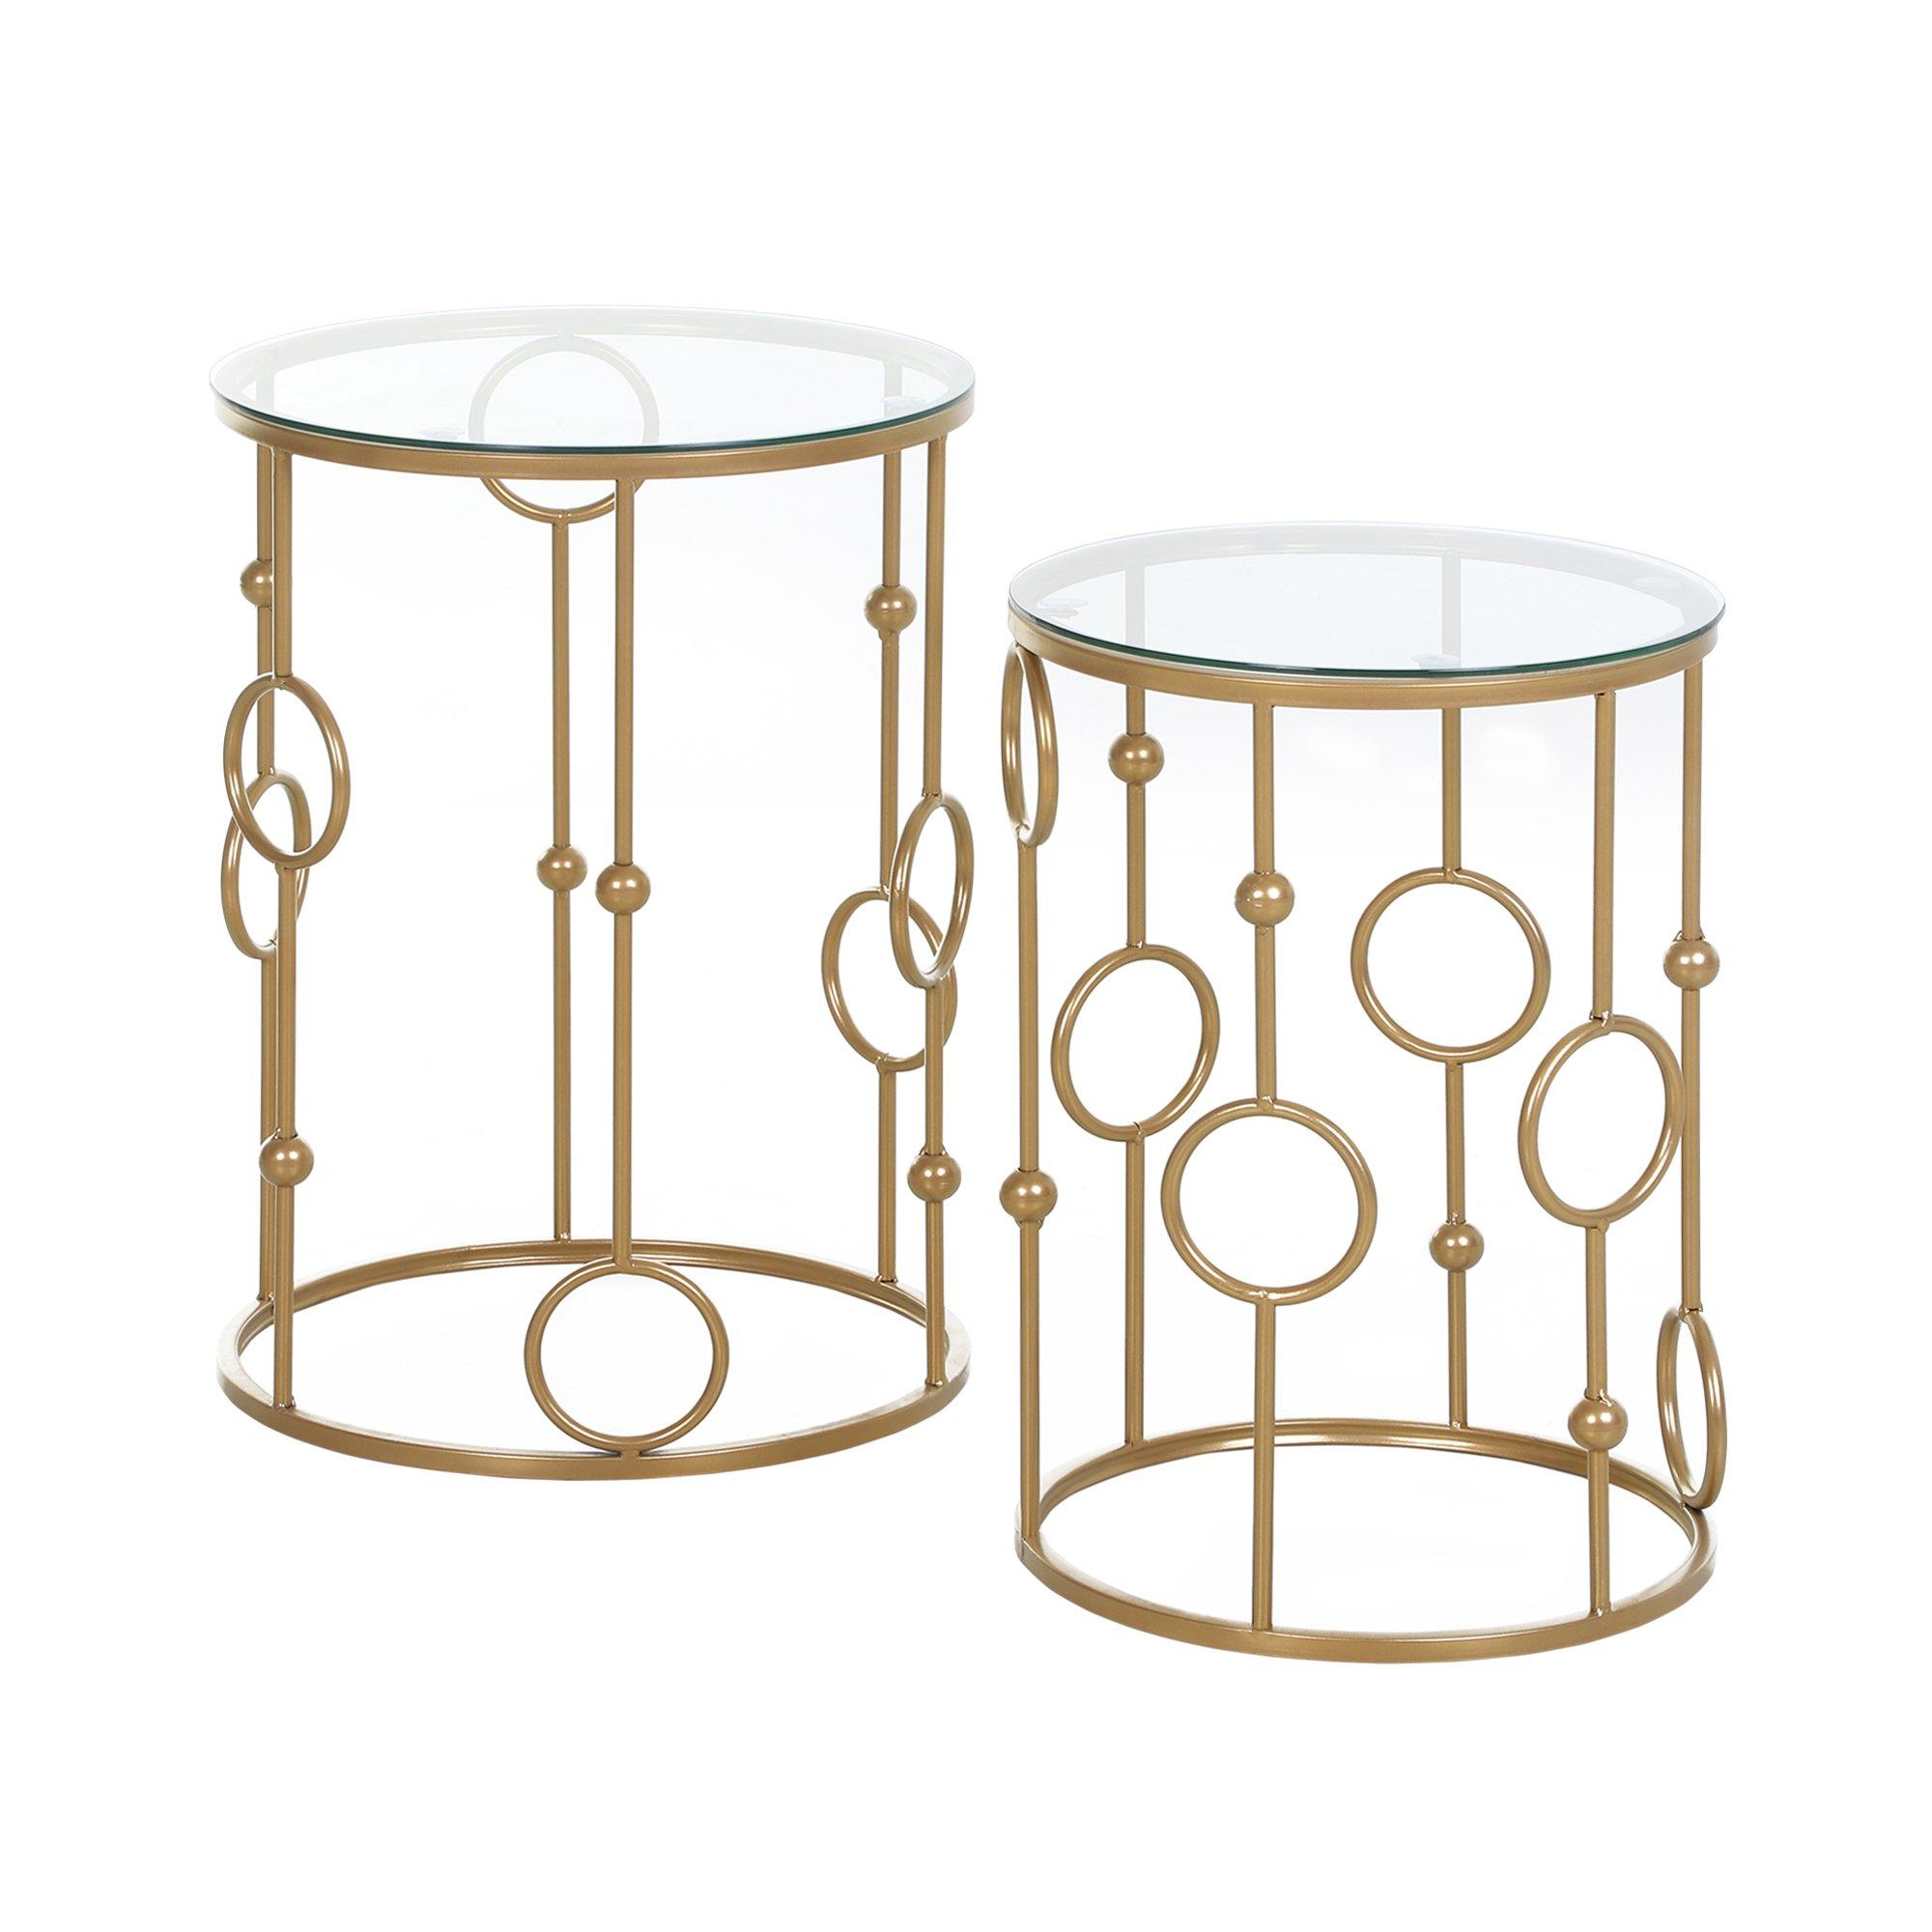 Round Coffee Tables Set of 2 Gold Nesting Side End Tables